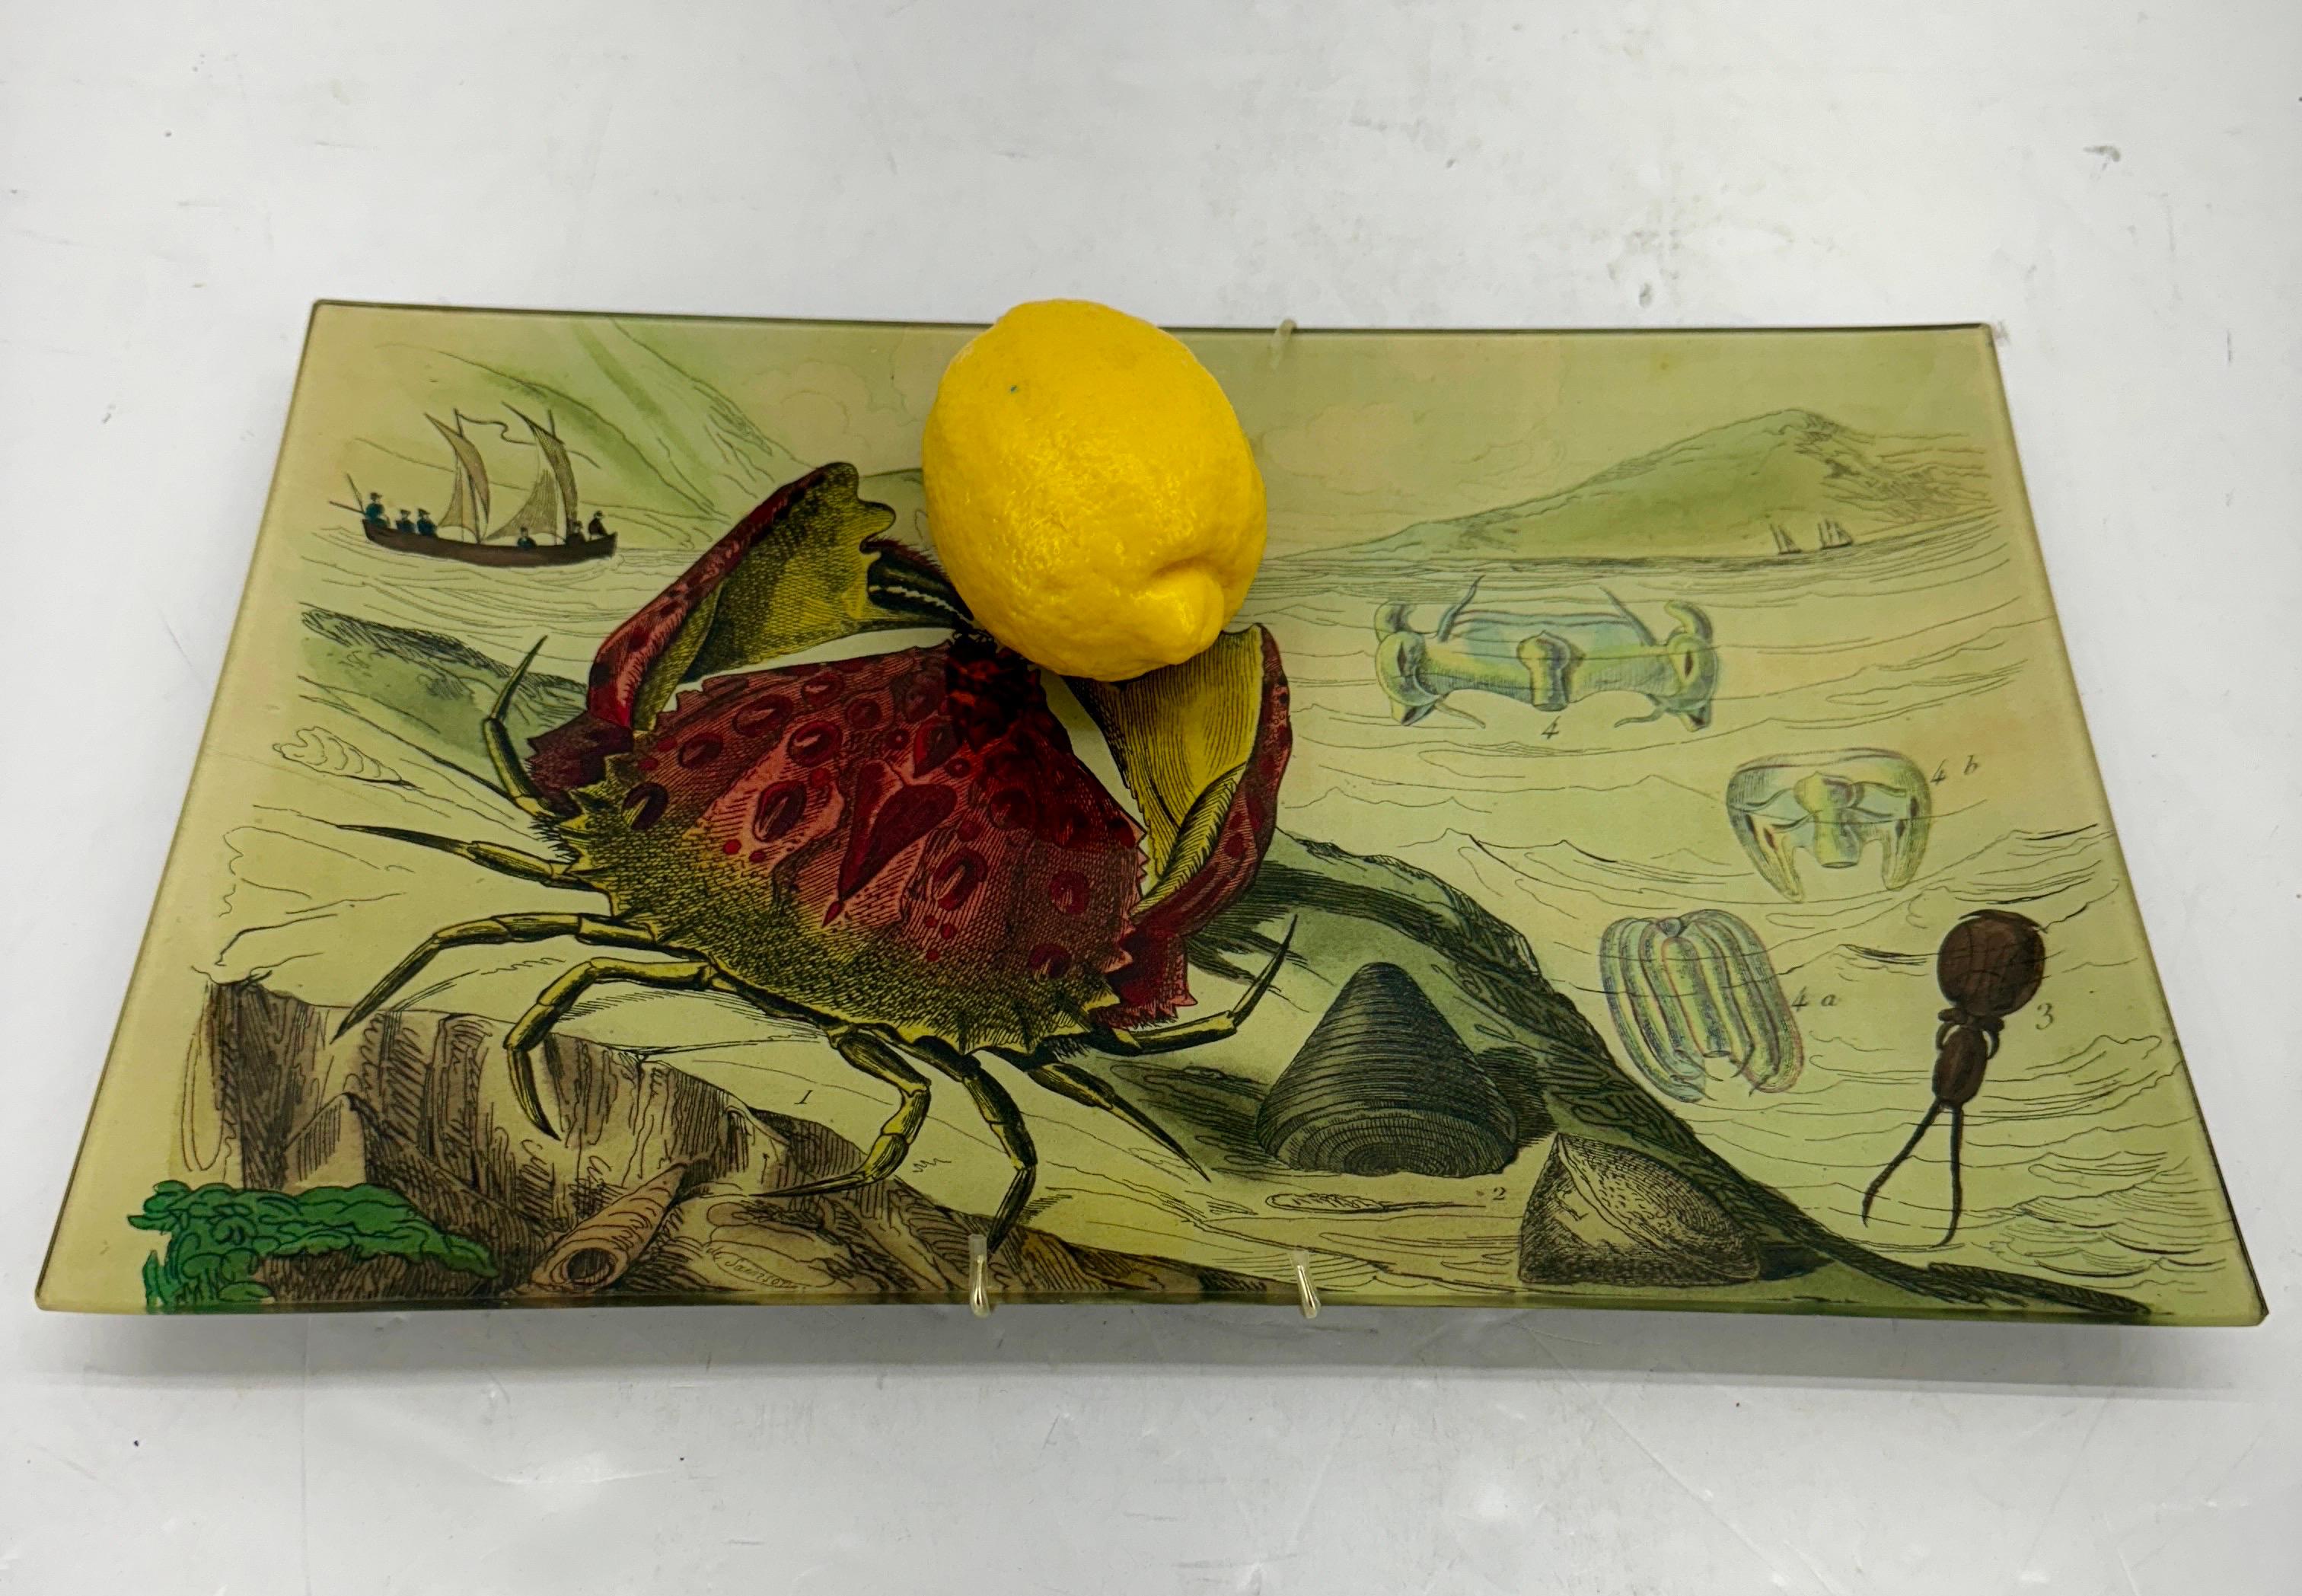 Handmade John Derian Signed Sea Life Crab Boat Decoupage Tray

Since 1989, John Derain and a small studio of artisans in New York City have been creating glass plates, trays, bowls, and other decorative home items with decoupage from his vast and